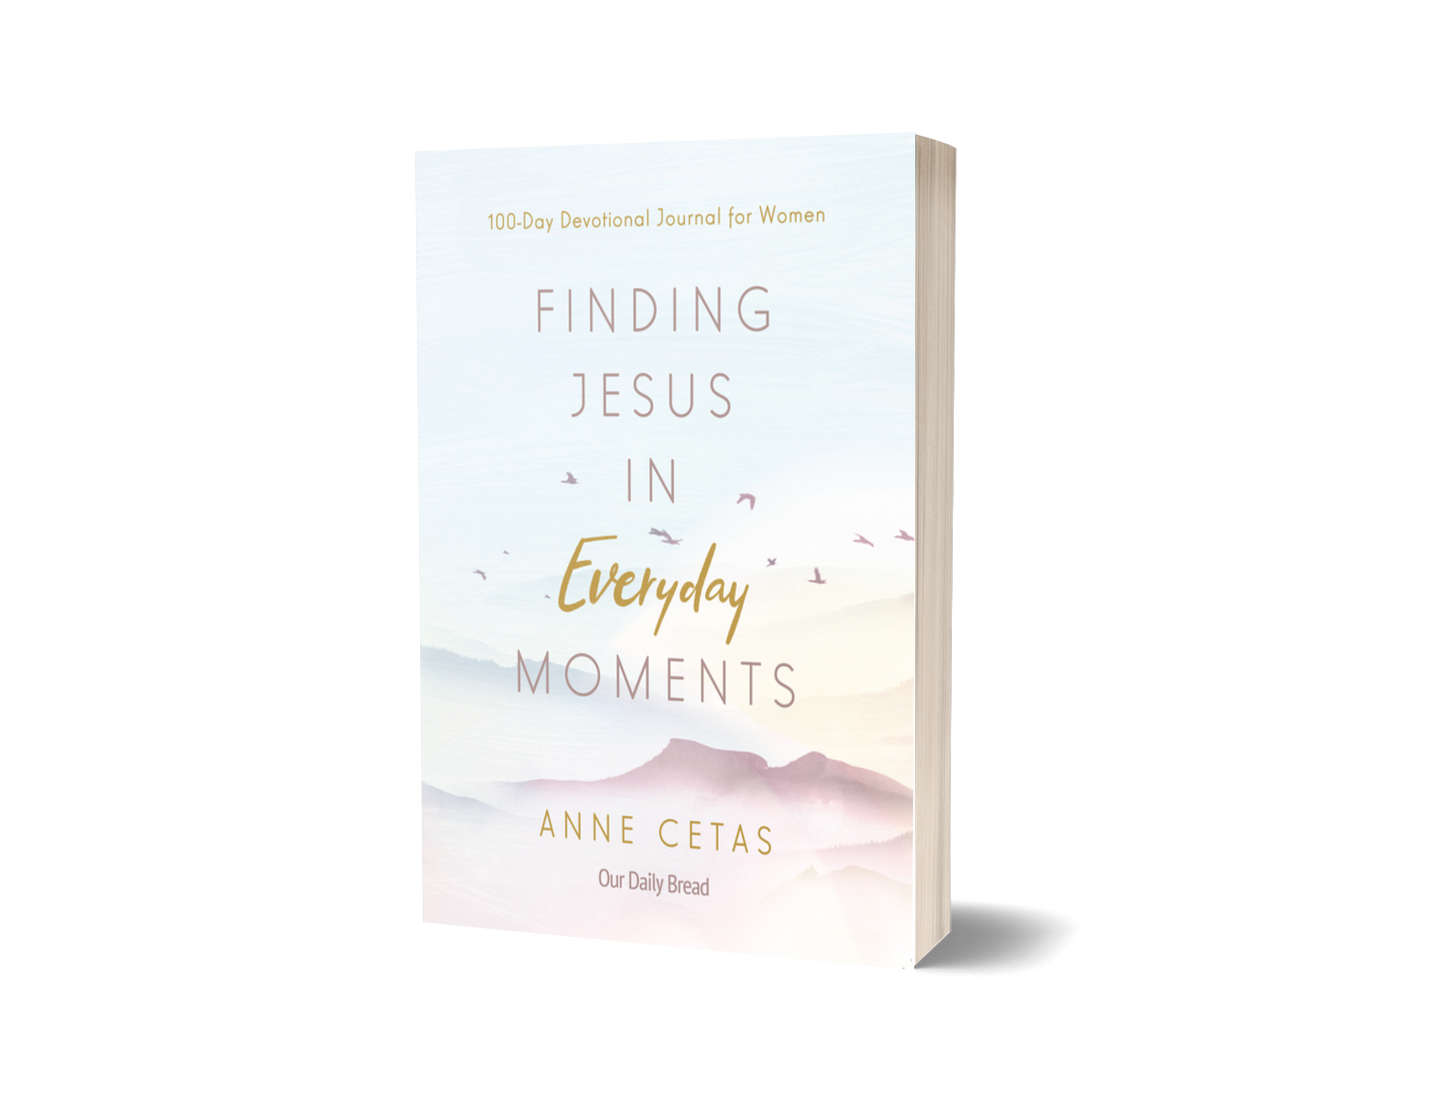 Finding Jesus in Everyday Moments